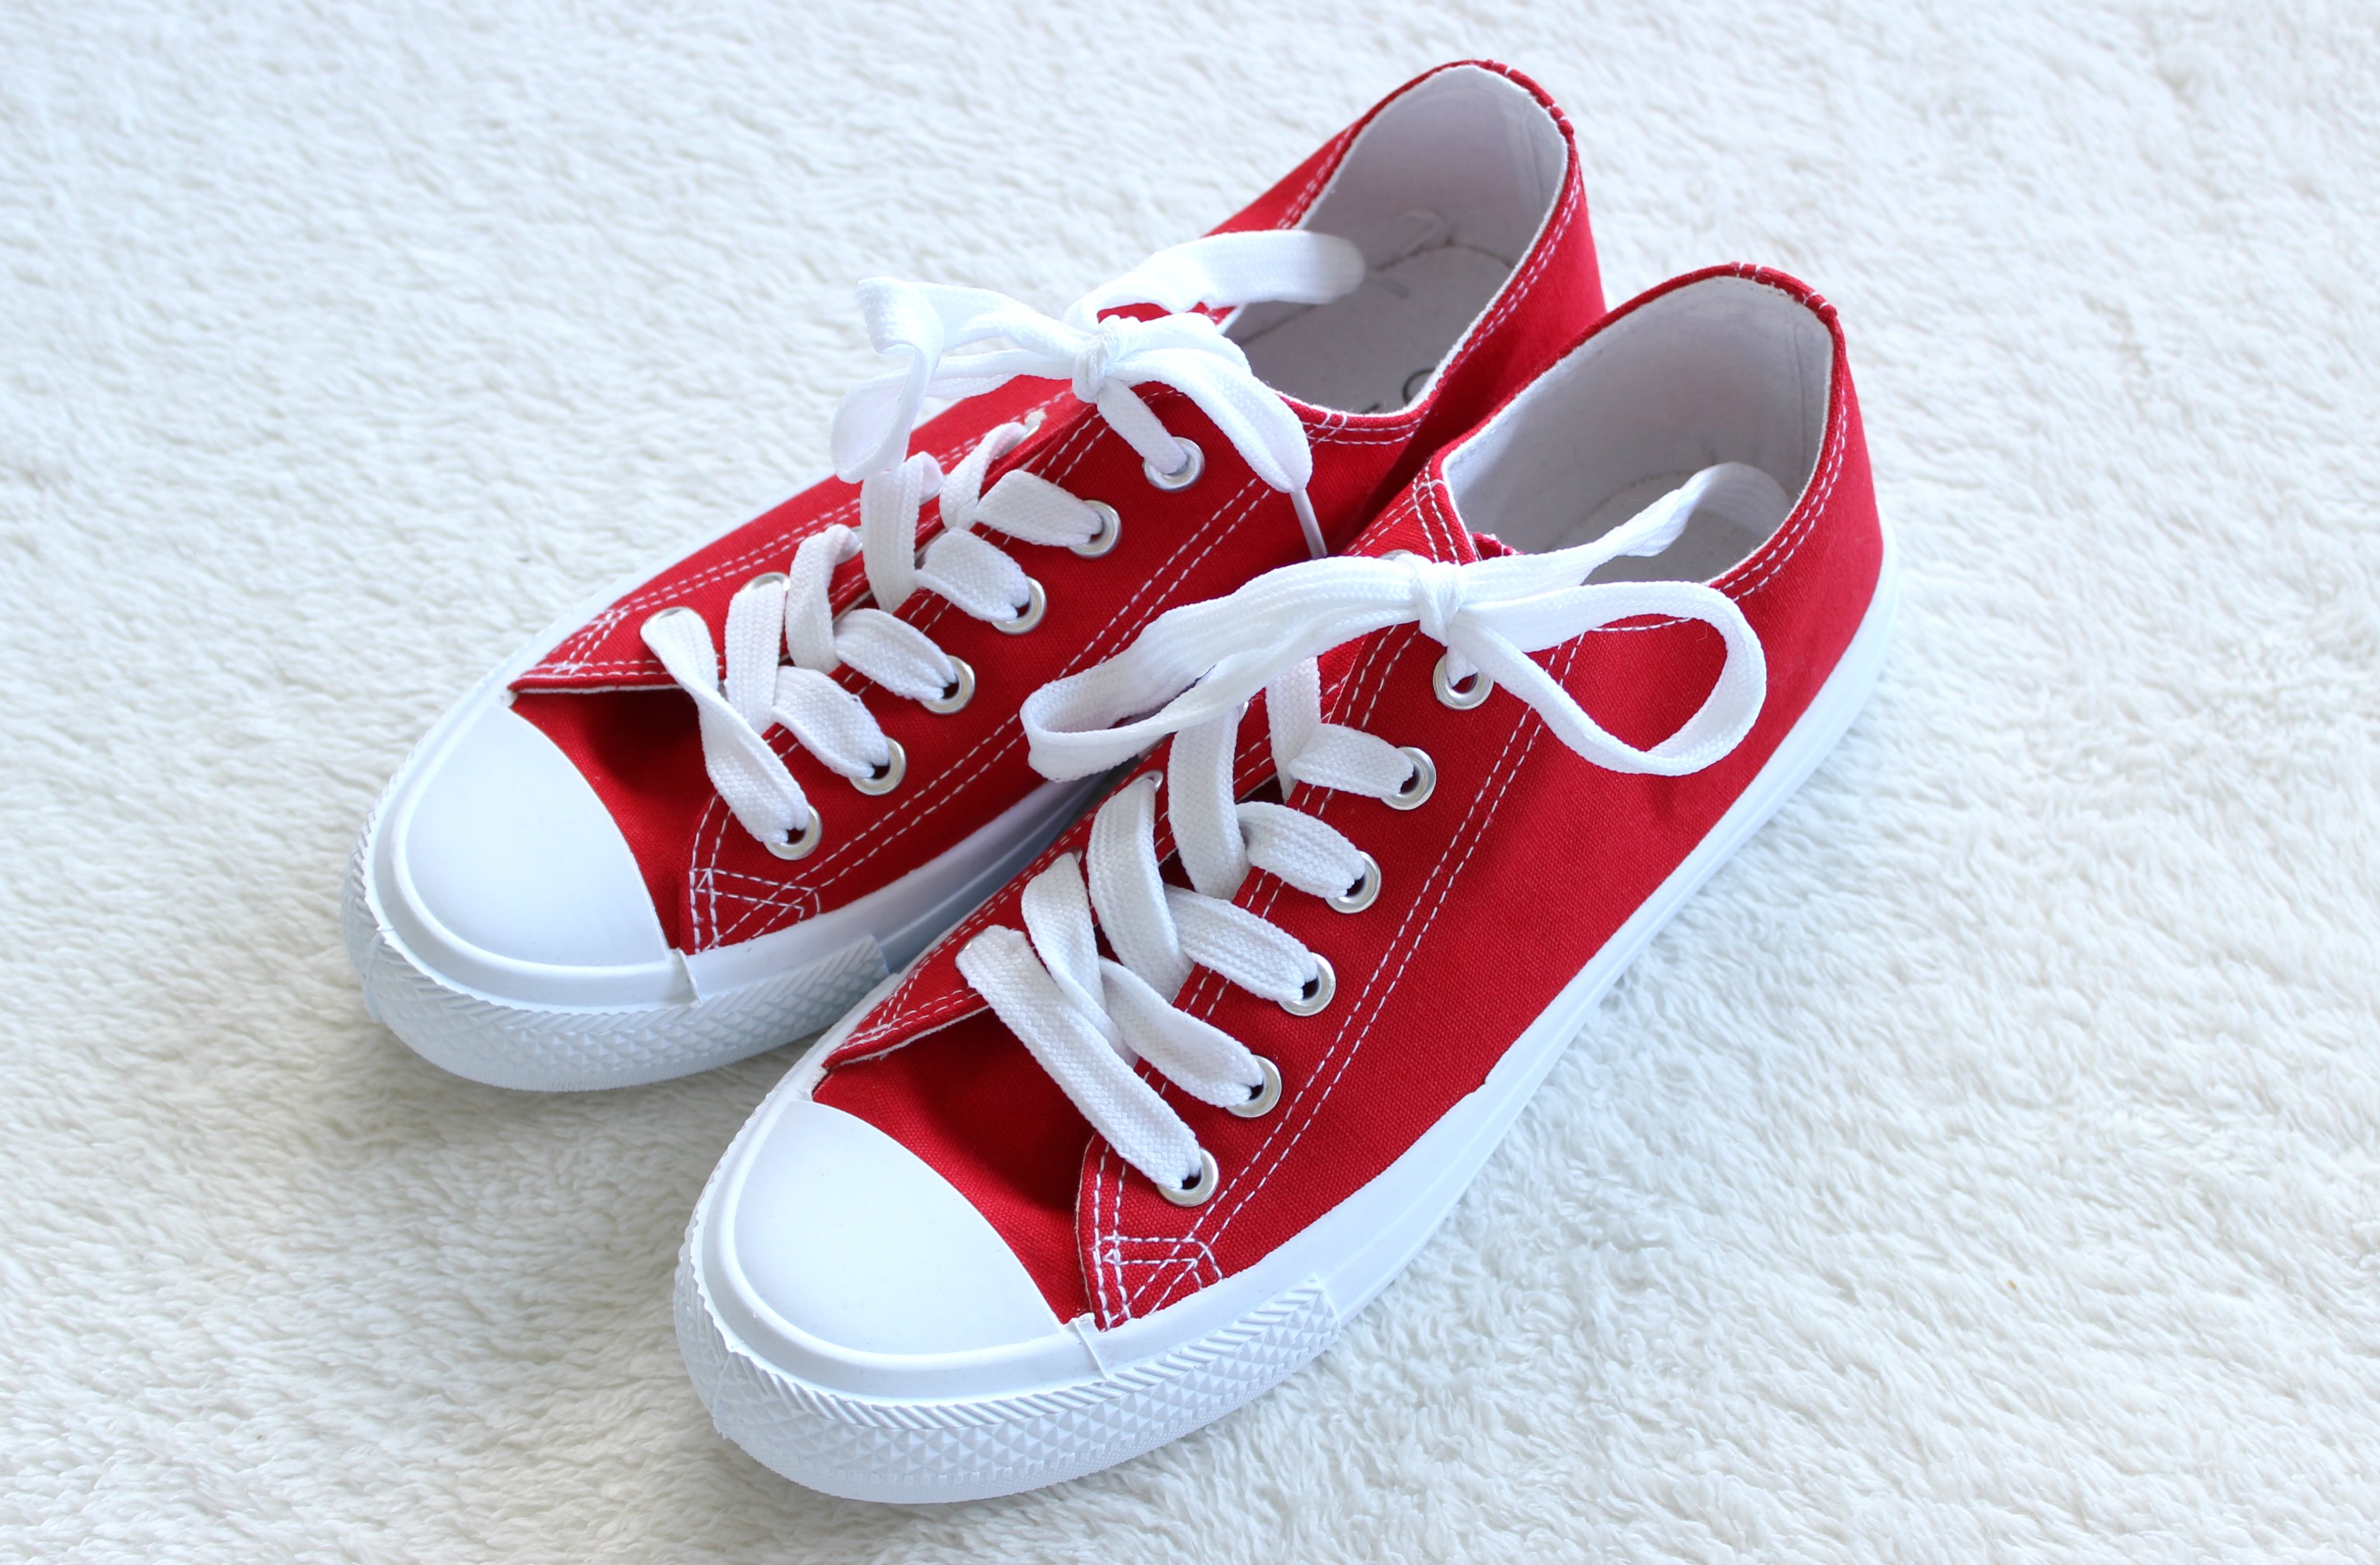 kmart haul red sneakers shoes – A Style 